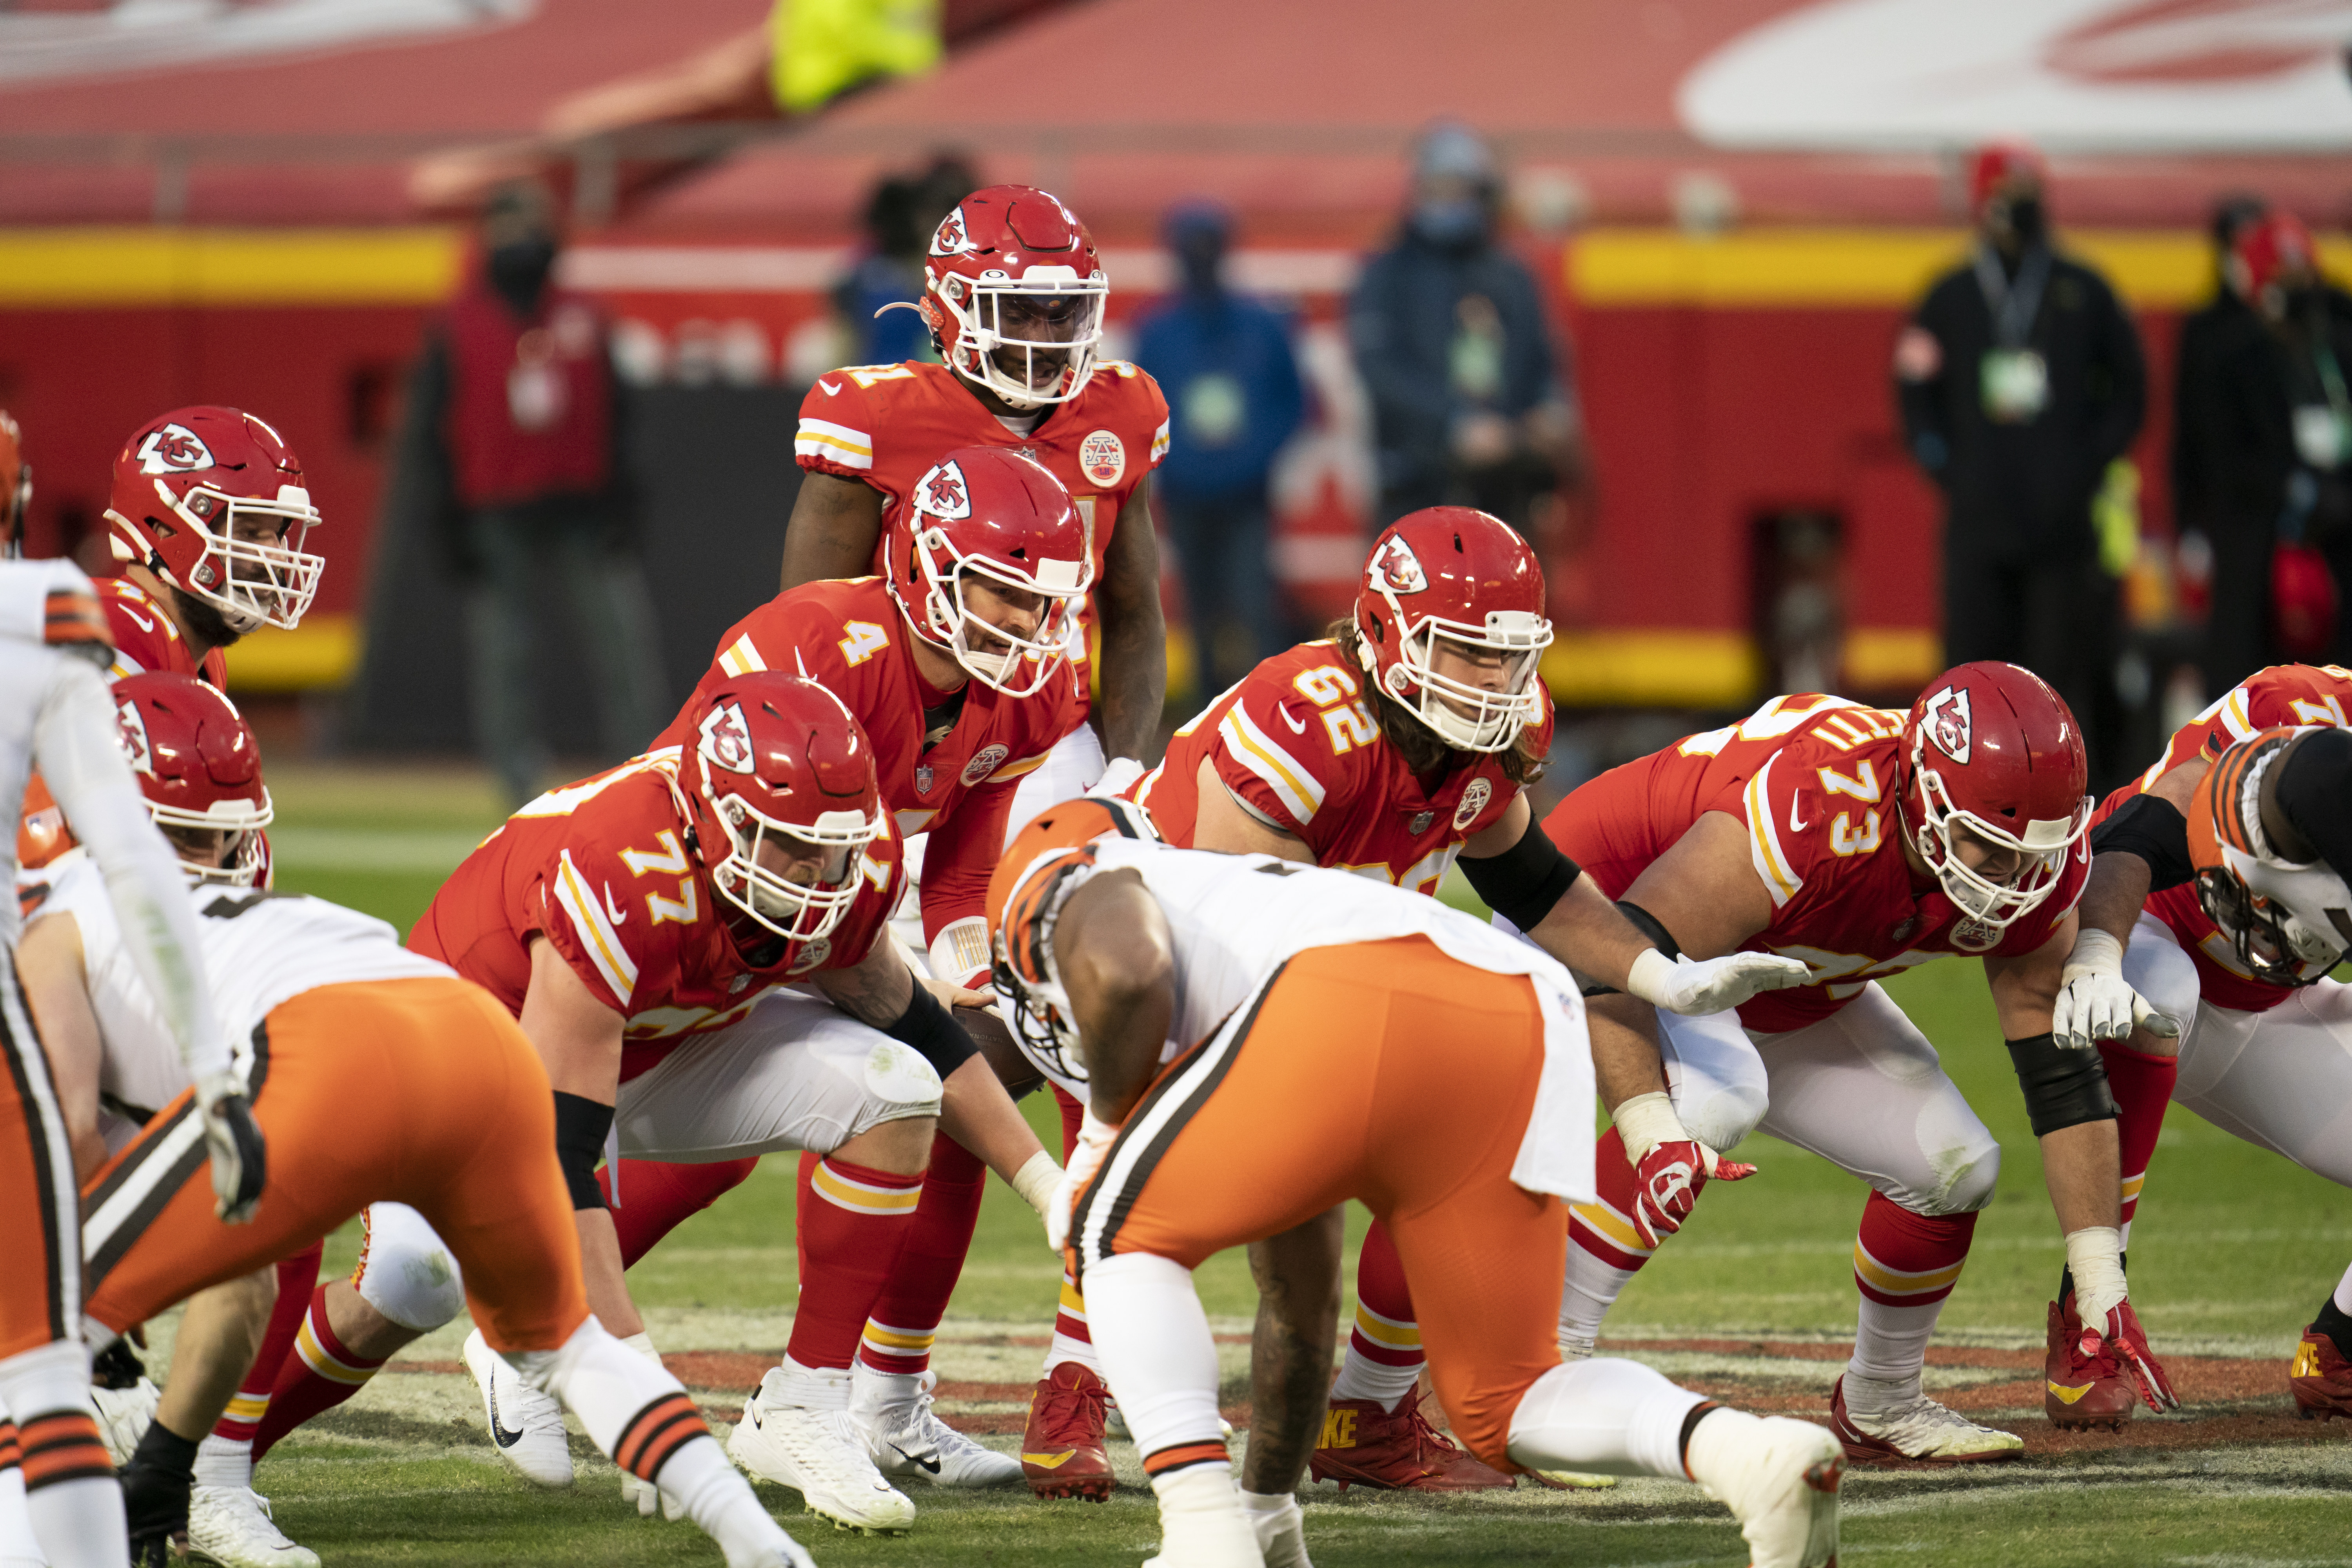 where to watch 49ers vs chiefs